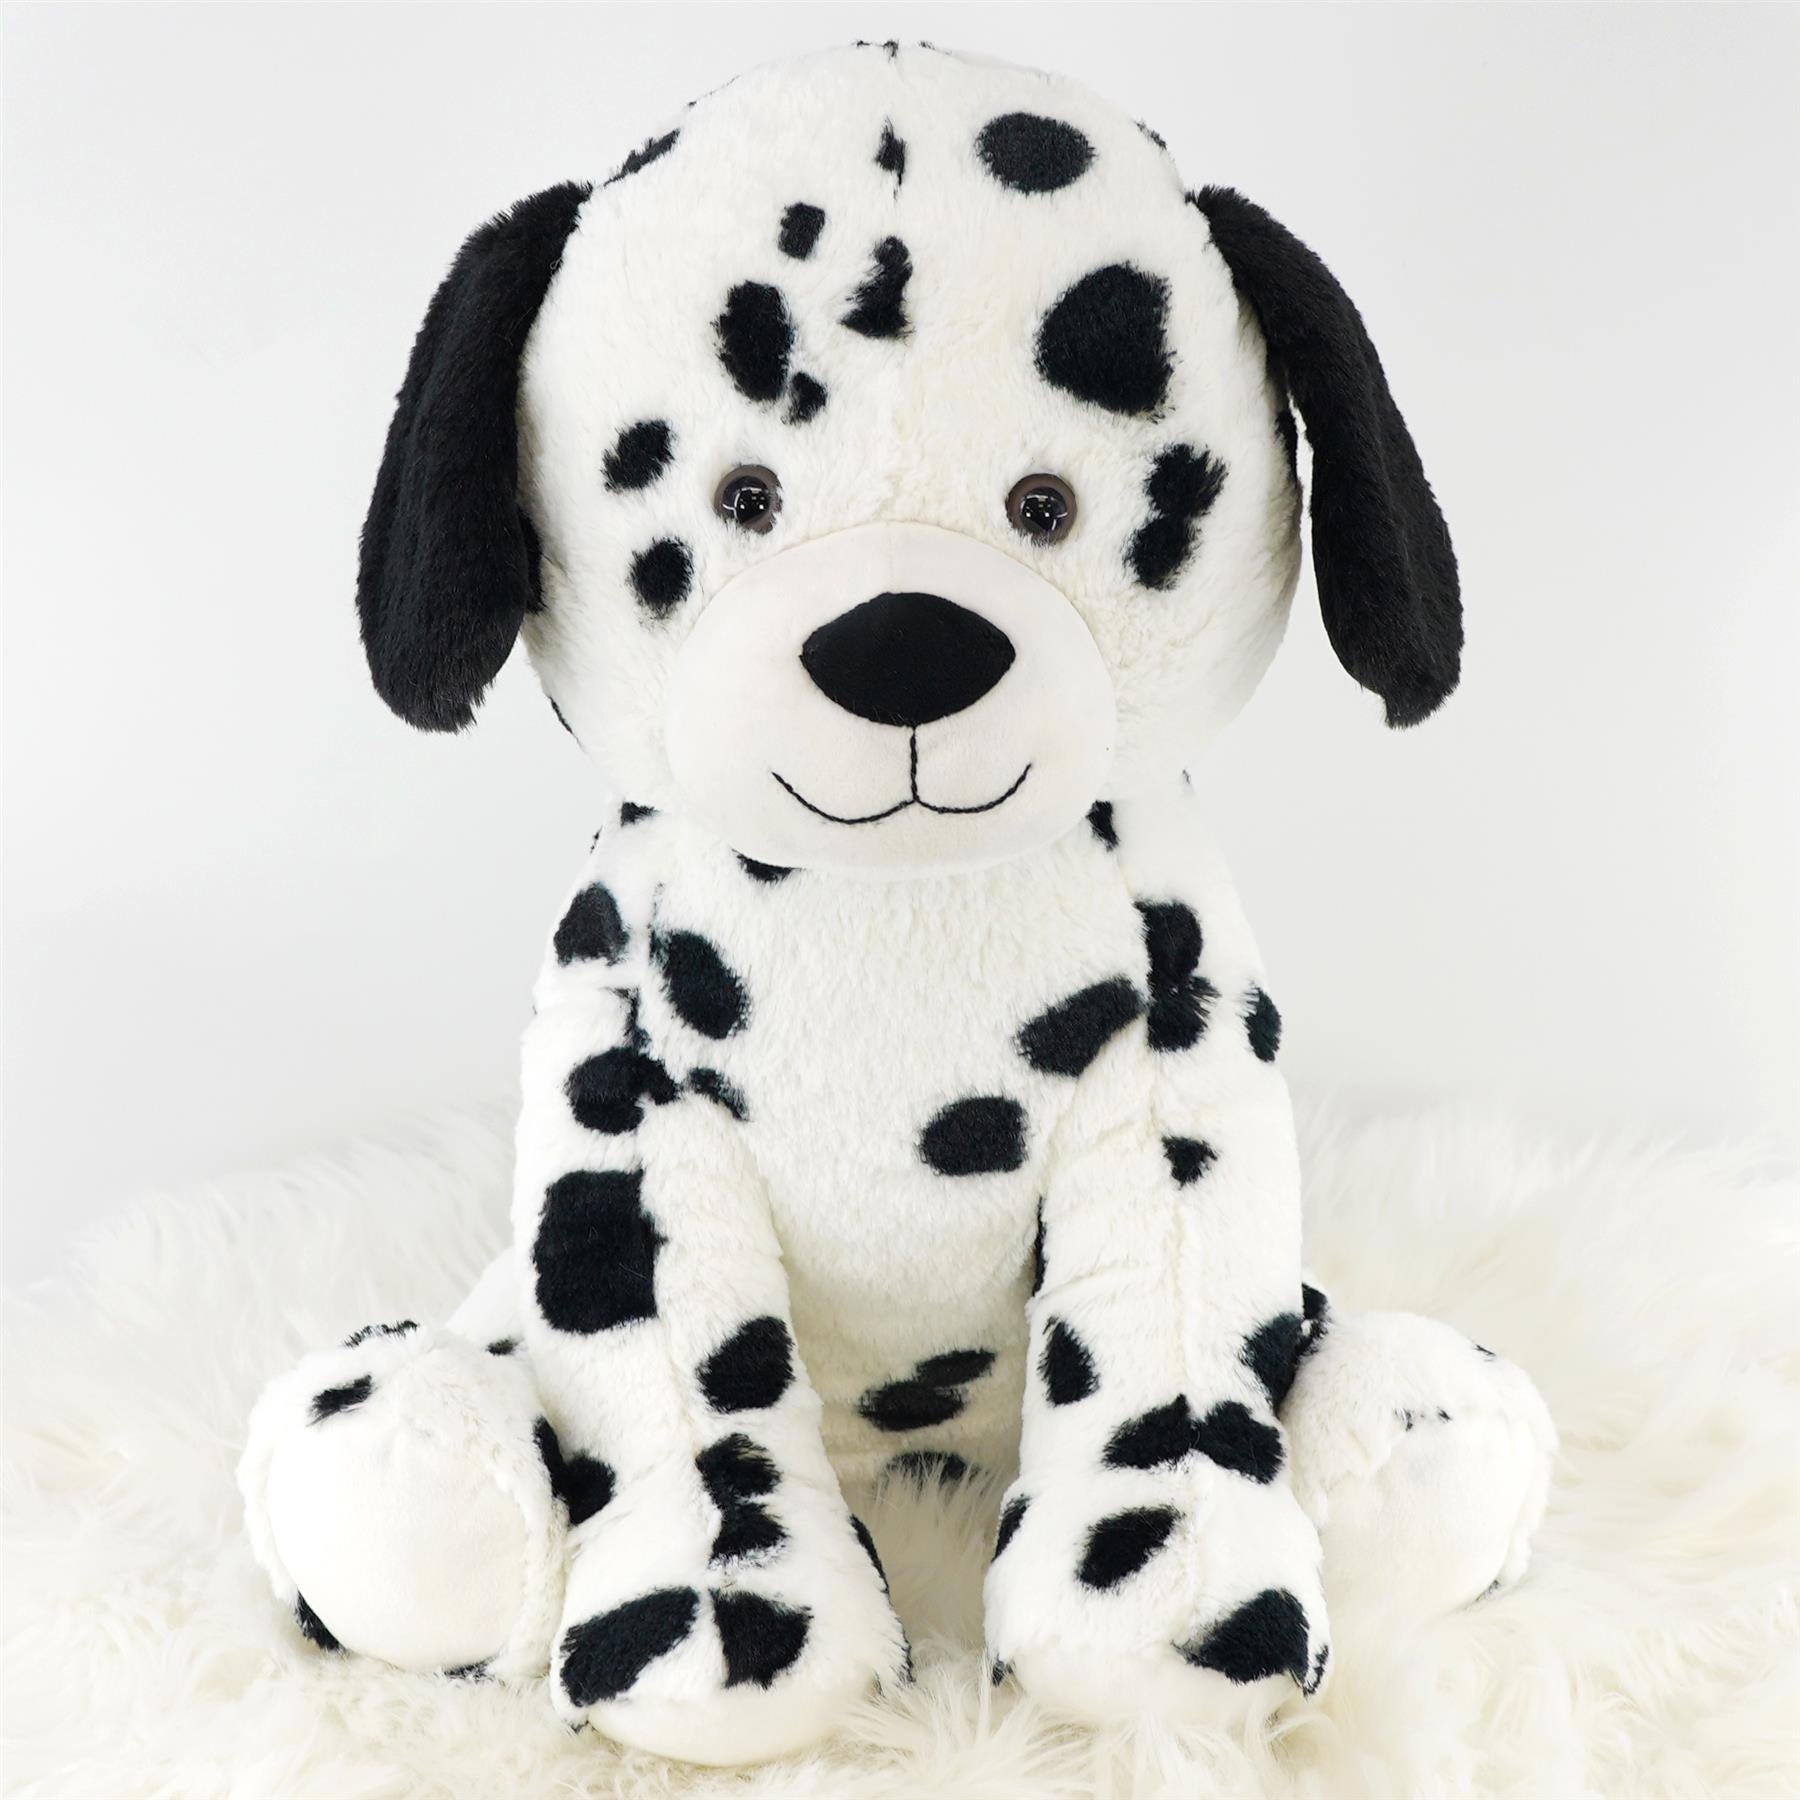 15" Plush Puppy Soft Dalmatian Dog Toy by The Magic Toy Shop - The Magic Toy Shop